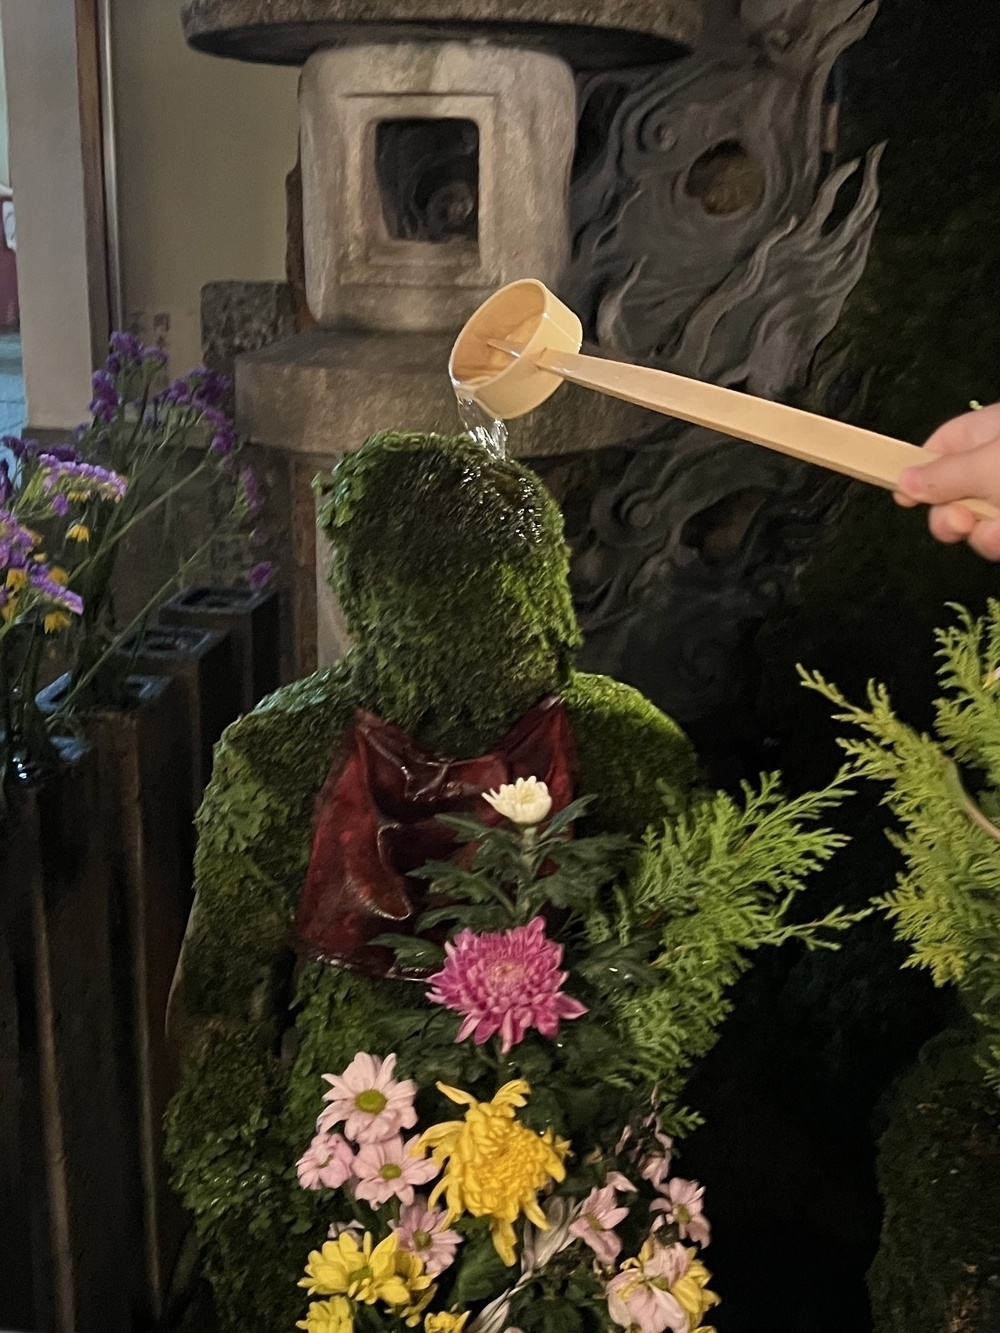 A hand holding a ladle pours water over a moss-covered statue